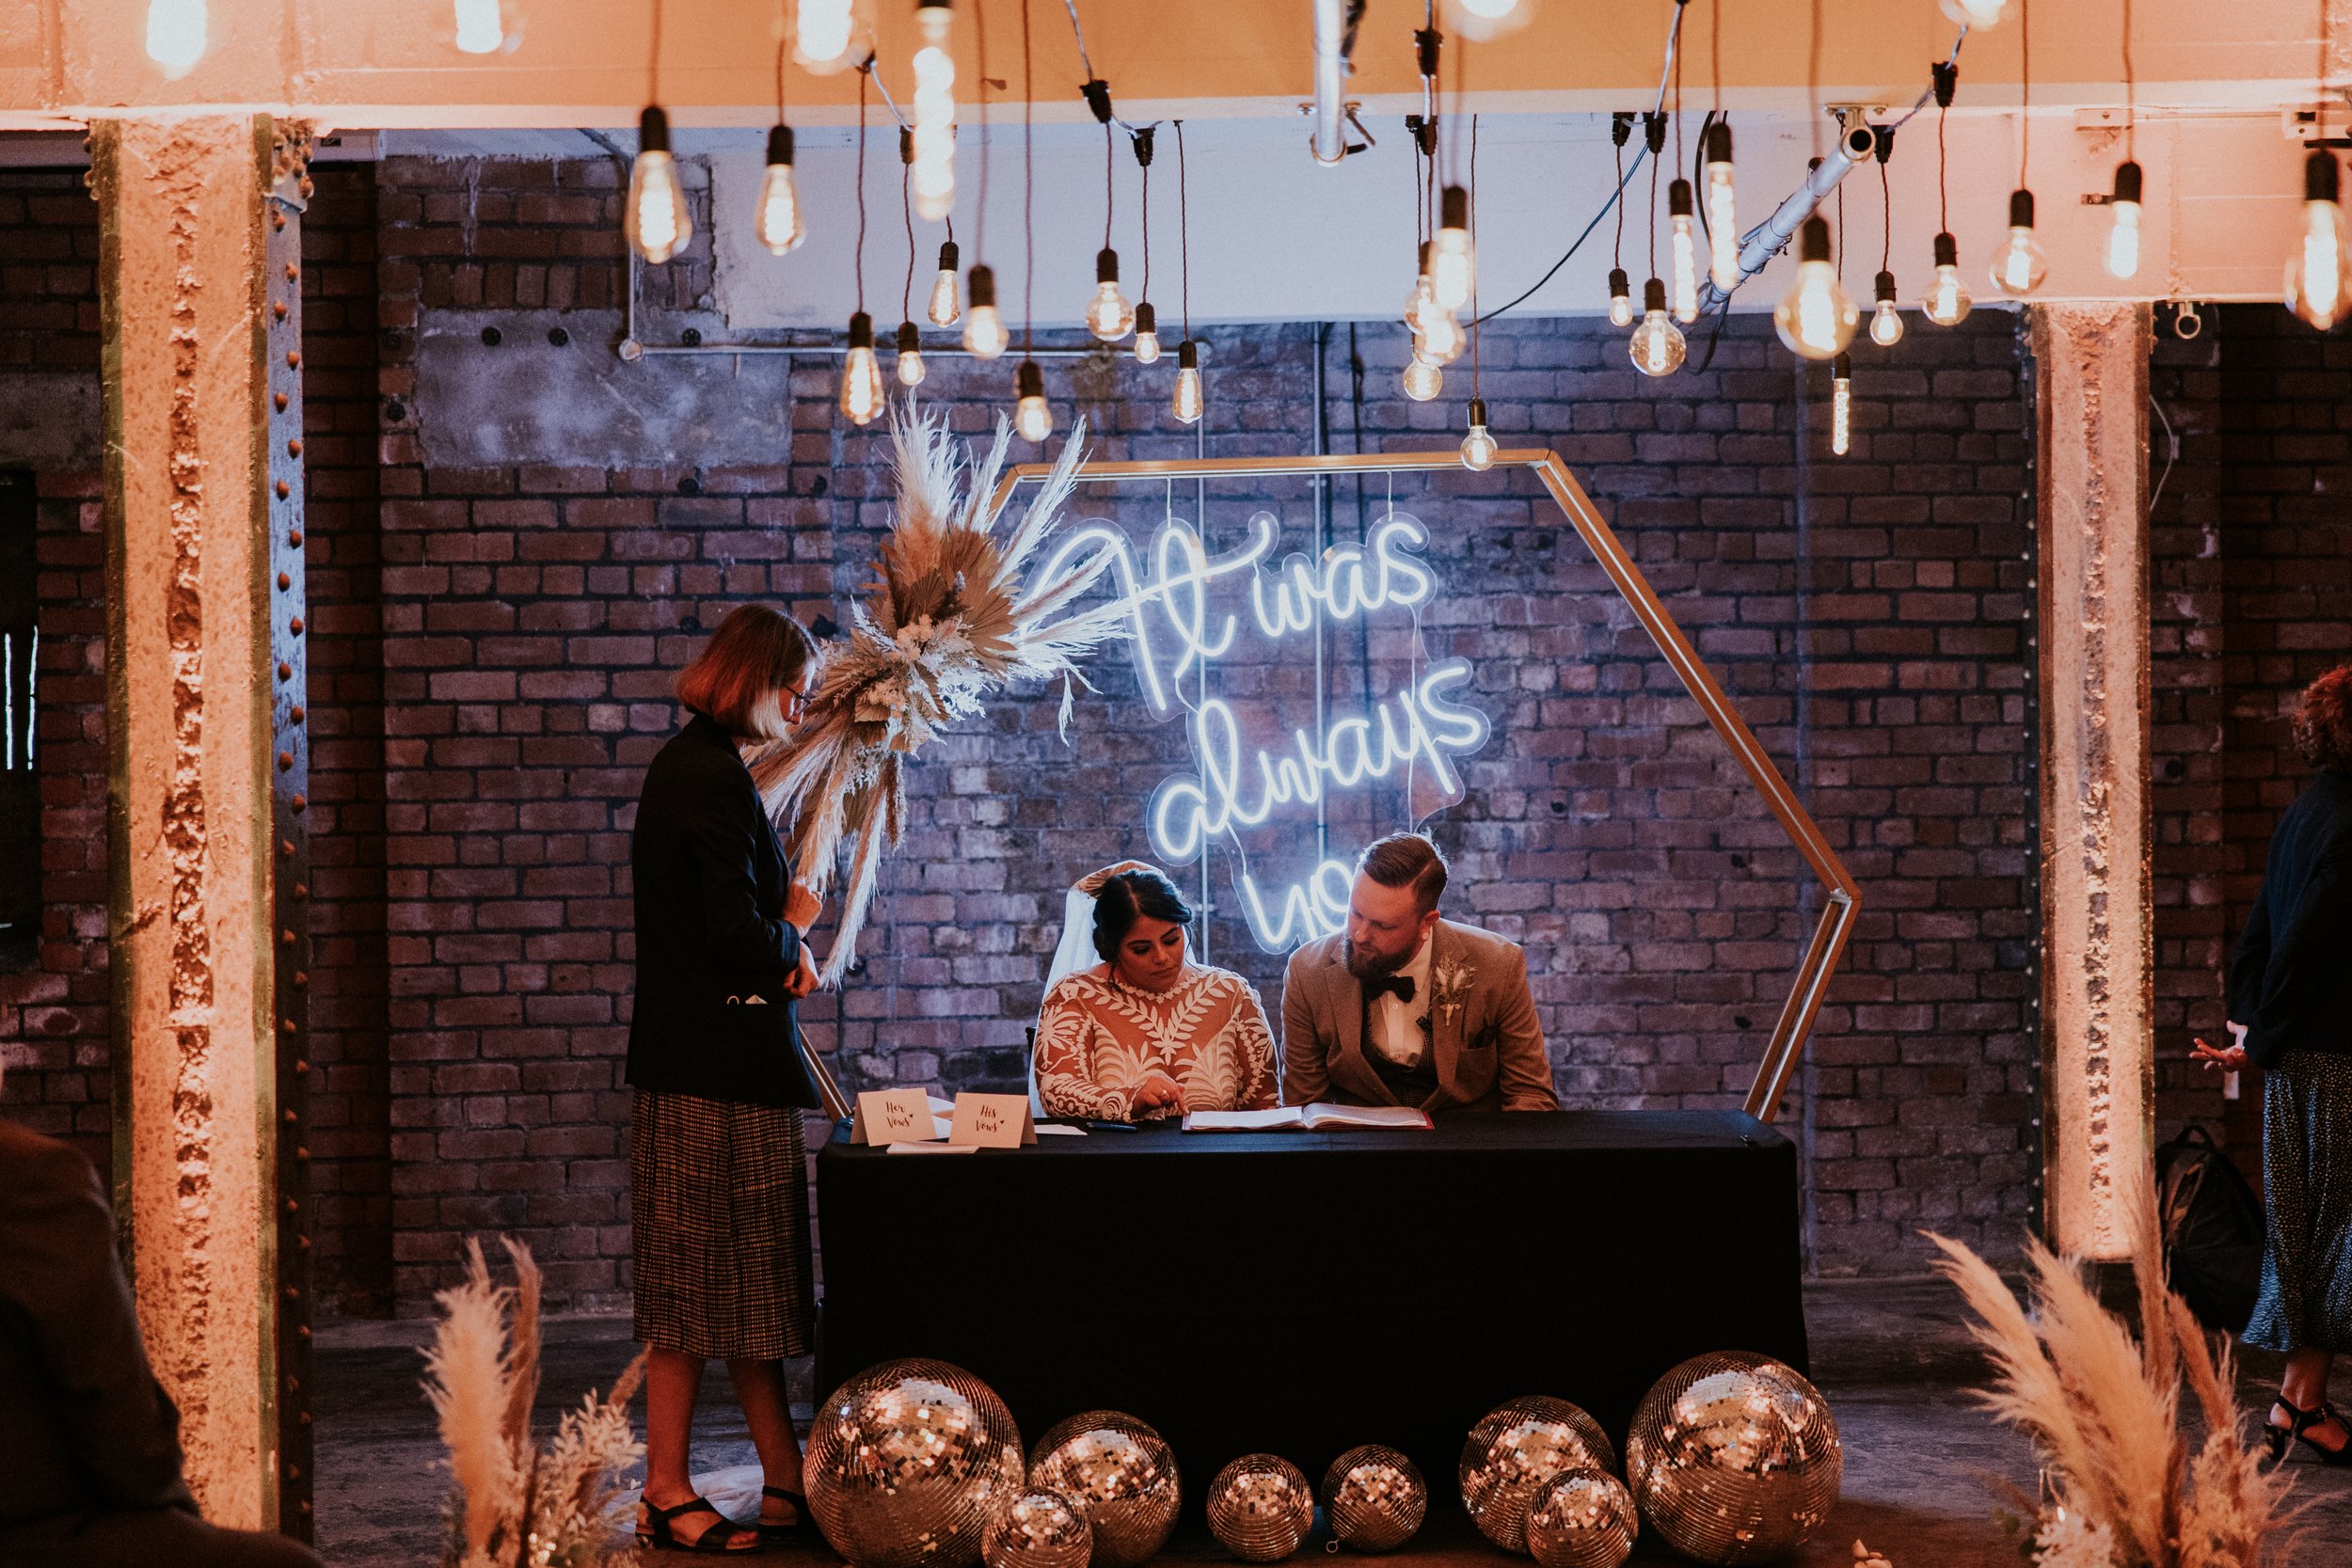  Photographer Credit: James Morris Photography  Inside Victoria Warehouse wedding venue. Bride and groom are sat at a table signing the wedding register. The table is covered in a black cloth with various size mirror balls along the floor. There are 